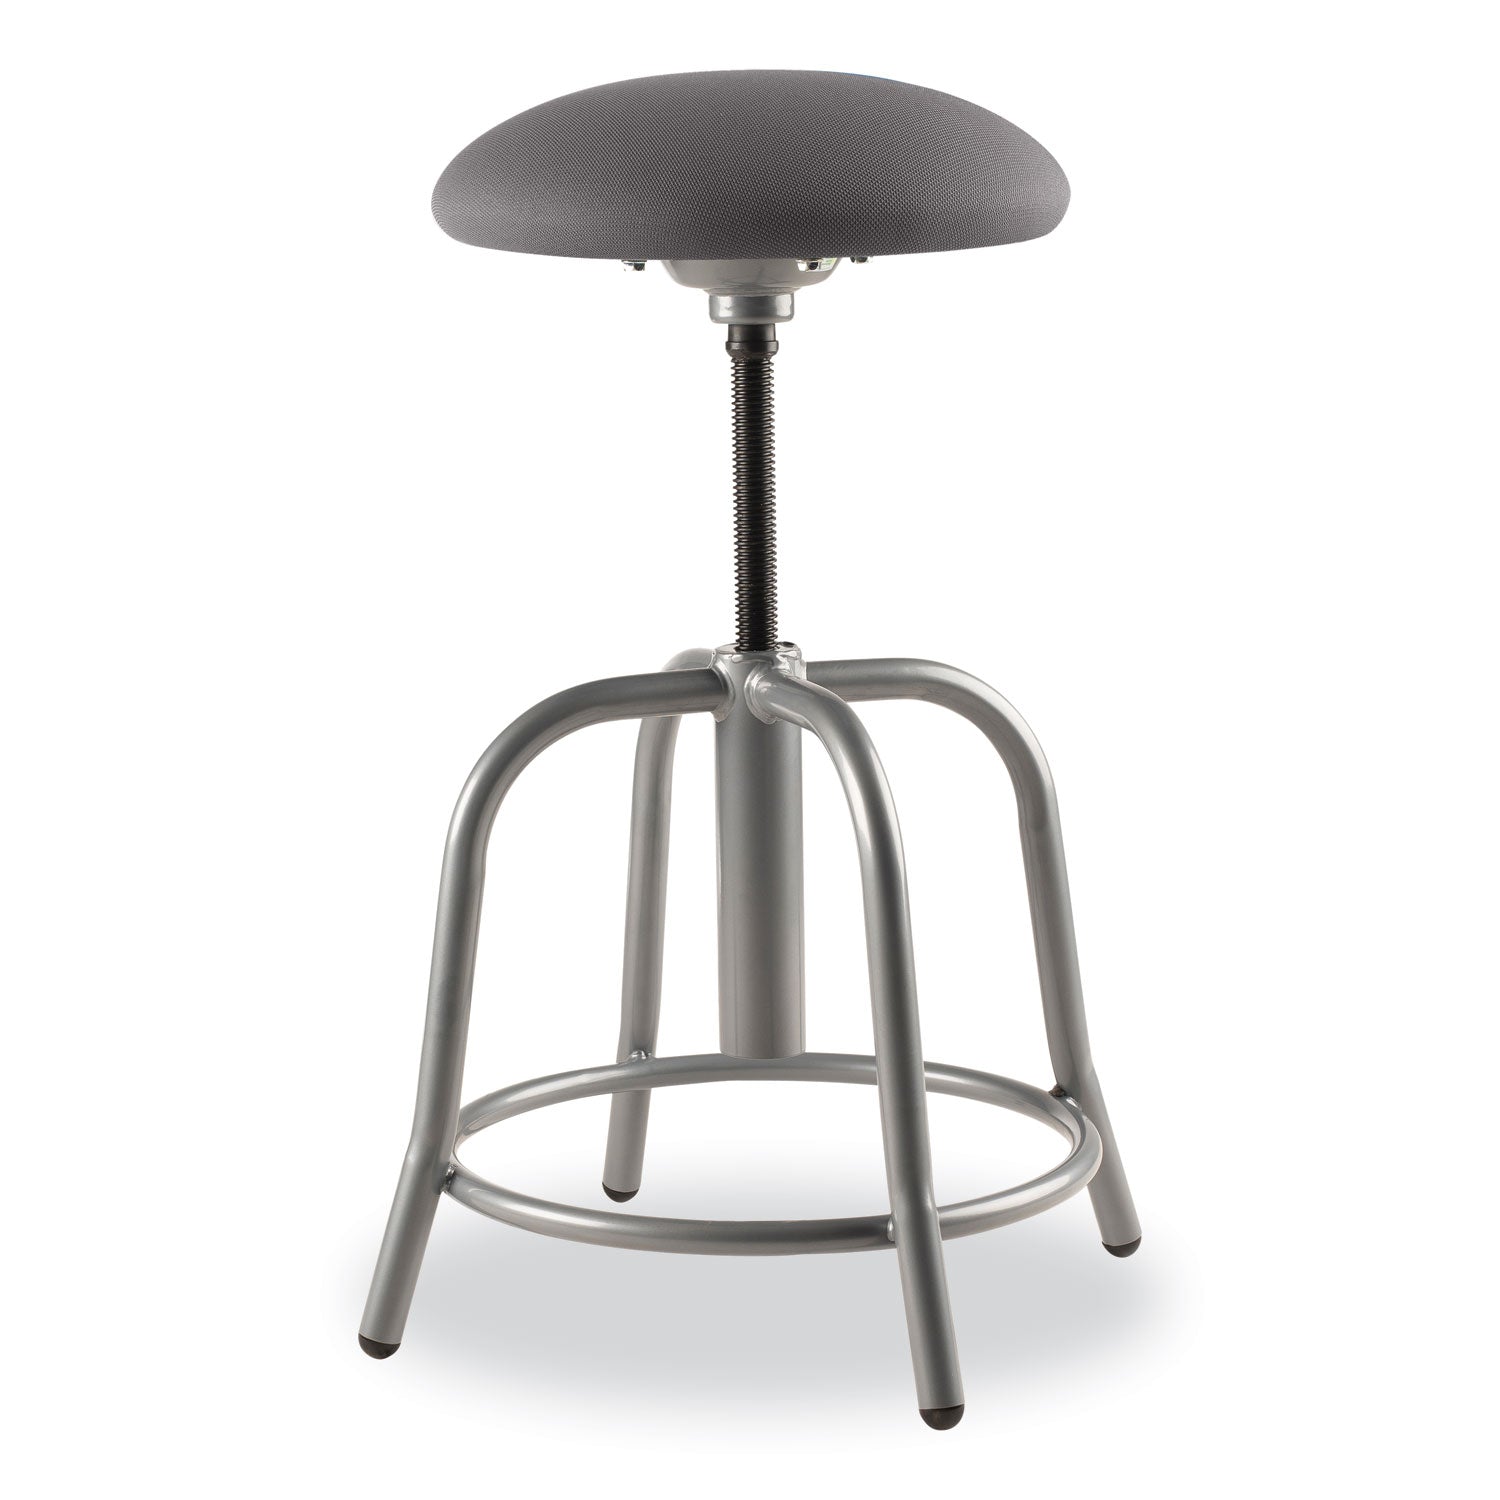 6800-series-height-adj-fabric-padded-swivel-stool-supports-300-lb-18-25-ht-charcoal-seat-gray-baseships-in-1-3-bus-days_nps6820s02 - 2